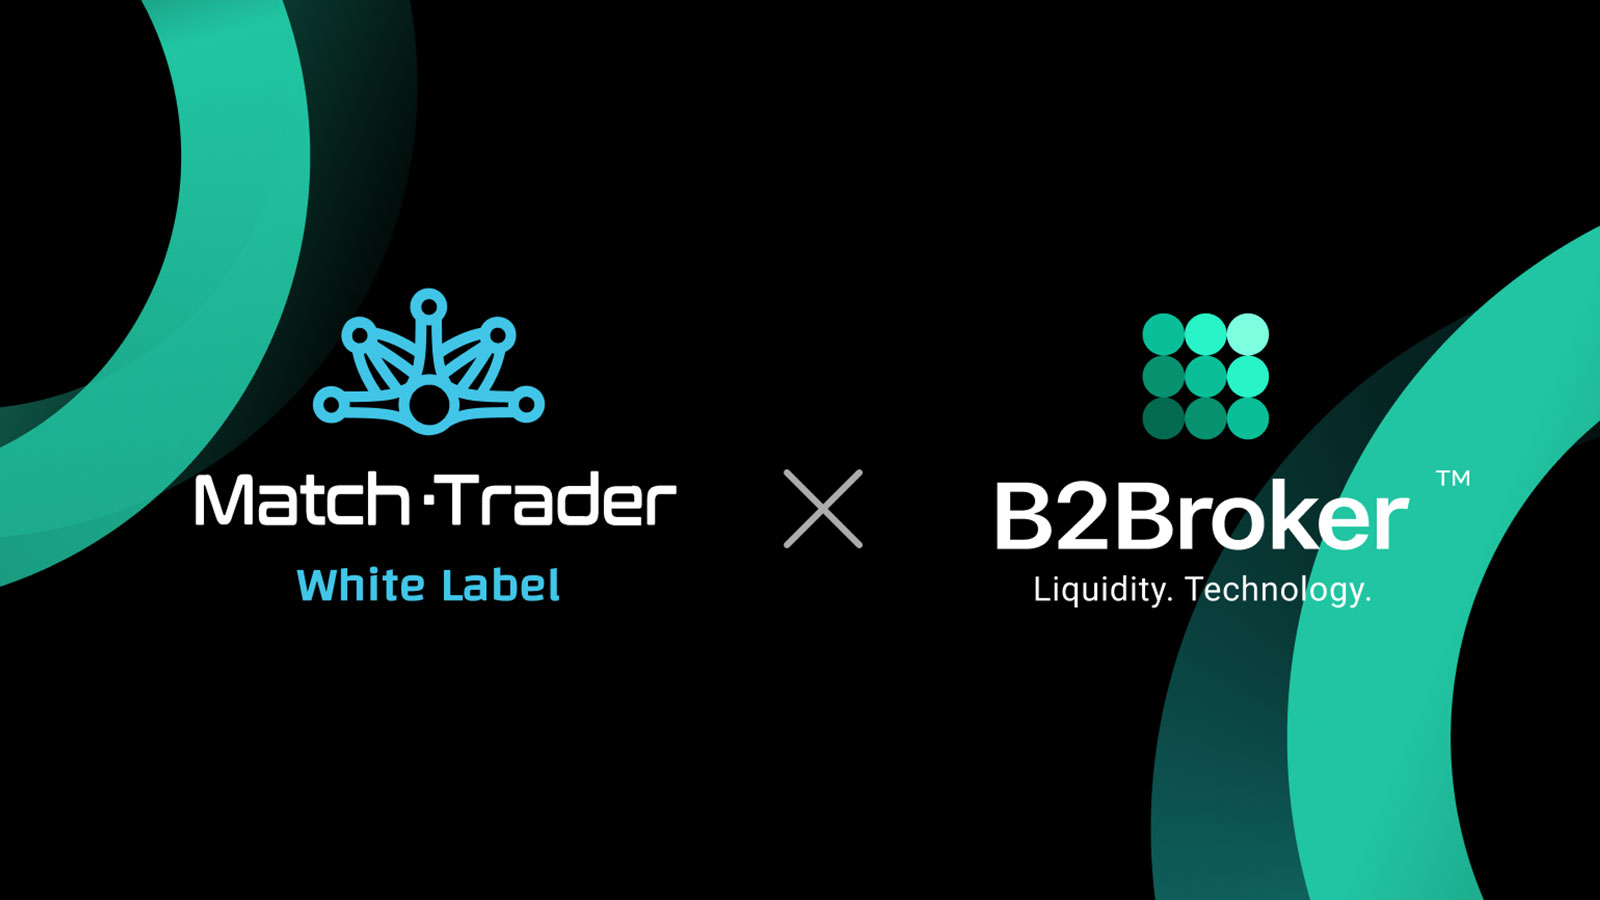 B2Broker Launches Match-Trader White Label Solution for Brokers with B2Core Integration